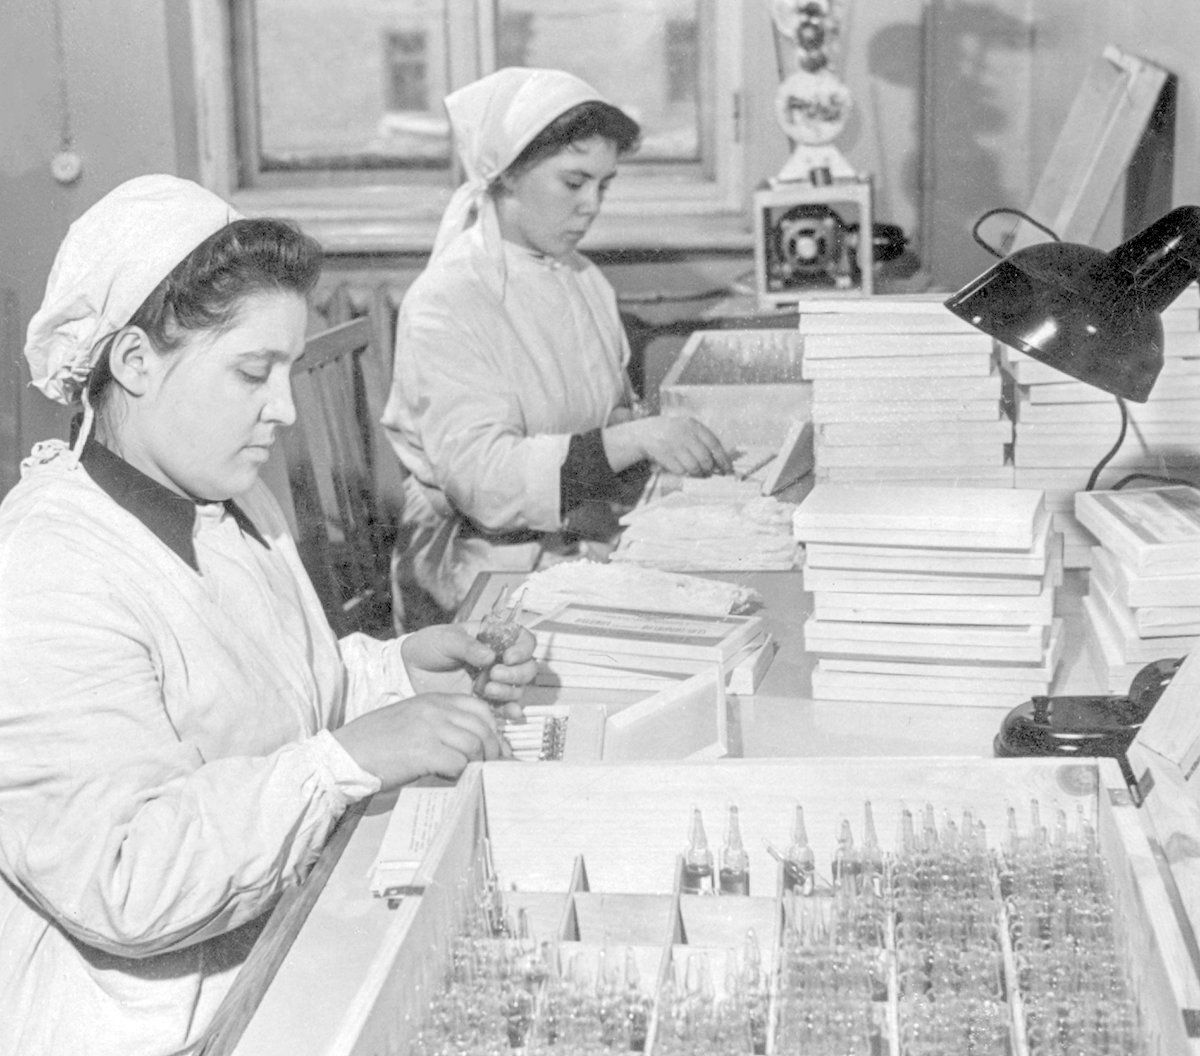 A pack of ready-made polio vaccine at the Polio Research Institute. Photo by Yu. Pocheptsov. Moscow region. 15 January 1958. Main Archive Department of Moscow